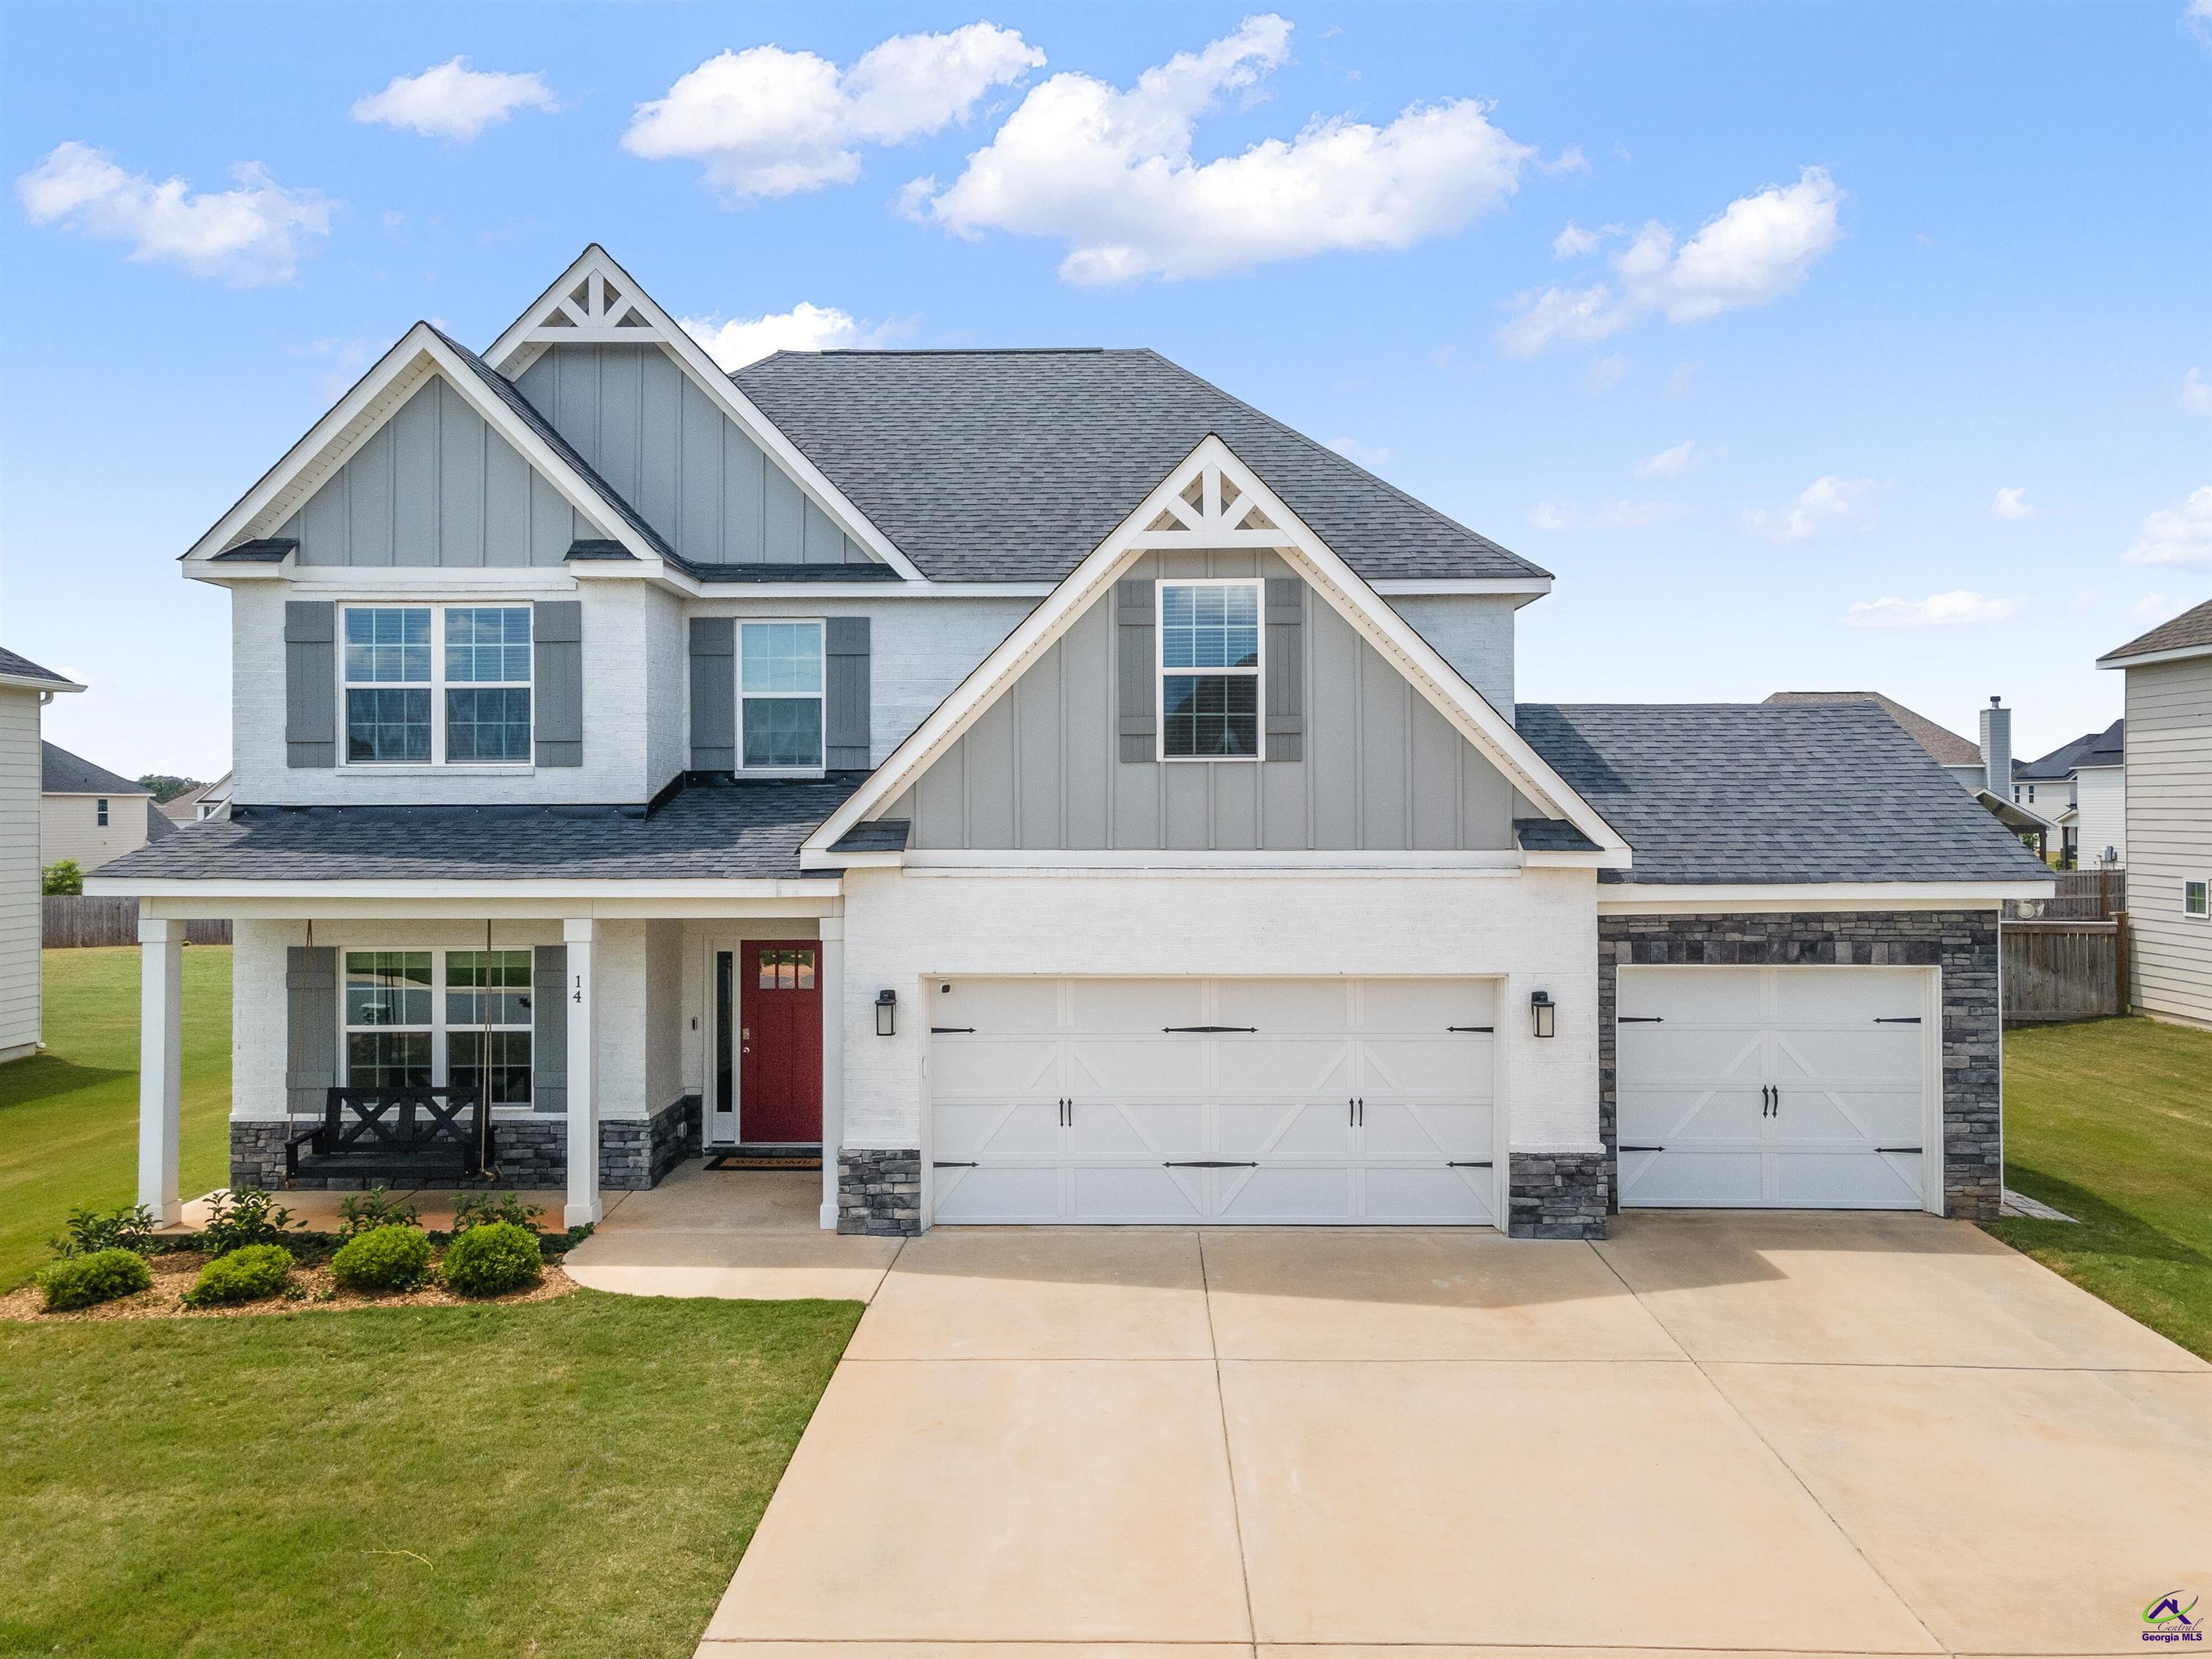 Newly listed in Kathleen, GA - Mossy Meadows Subdivision! Beautiful 2 story newly built home, in 2021, on slightly under a 1/3 Acre Homesite in the HOCO High School District. With many extras and upgrades. This Hughston Home Hawthorn Floor Plan comes equipped with an 3-Car attached garage and boasts five spacious bedrooms with room for relaxing, entertaining, and dining with three nicely designed bathrooms with tiled surround tubs. Please note there is a bedroom and full bathroom on the main level. Chef-Inspired Gourmet Kitchen with stainless steel Frigidaire ‘Gallery Series’ appliances w/Gas Stove, offering Diamond Brand Soft-Close Cabinetry, oversized island with Granite Countertops and breakfast area that flows through to the great room with a full painted brick interior fireplace with a Cedar Mantle and Corbels to match the Shaw (Brand) Pre-Engineered Hardwood Floors. Formal dining room has handcrafted wainscoting with an elegant chandelier accenting any dining room table. Luxurious Owner’s Suite with oversized walk-in closet, double vanity with Piedrafina Carrera Countertops, tiled walk in-shower, garden tub, and separate water closet. The laundry has entry off the bathroom upstairs. You will love the media room too. Game day back covered porch with ceiling fan, wood-burning fireplace, and pre-wired wired for your TV. Seller has assumable 2.65% - VA loan - inquire if you would like to look at assumption options. HOA is $200 a year. Zoned for Perdue Elementary, Mossy Creek Middle and Houston County High. Make your showing appointment today!